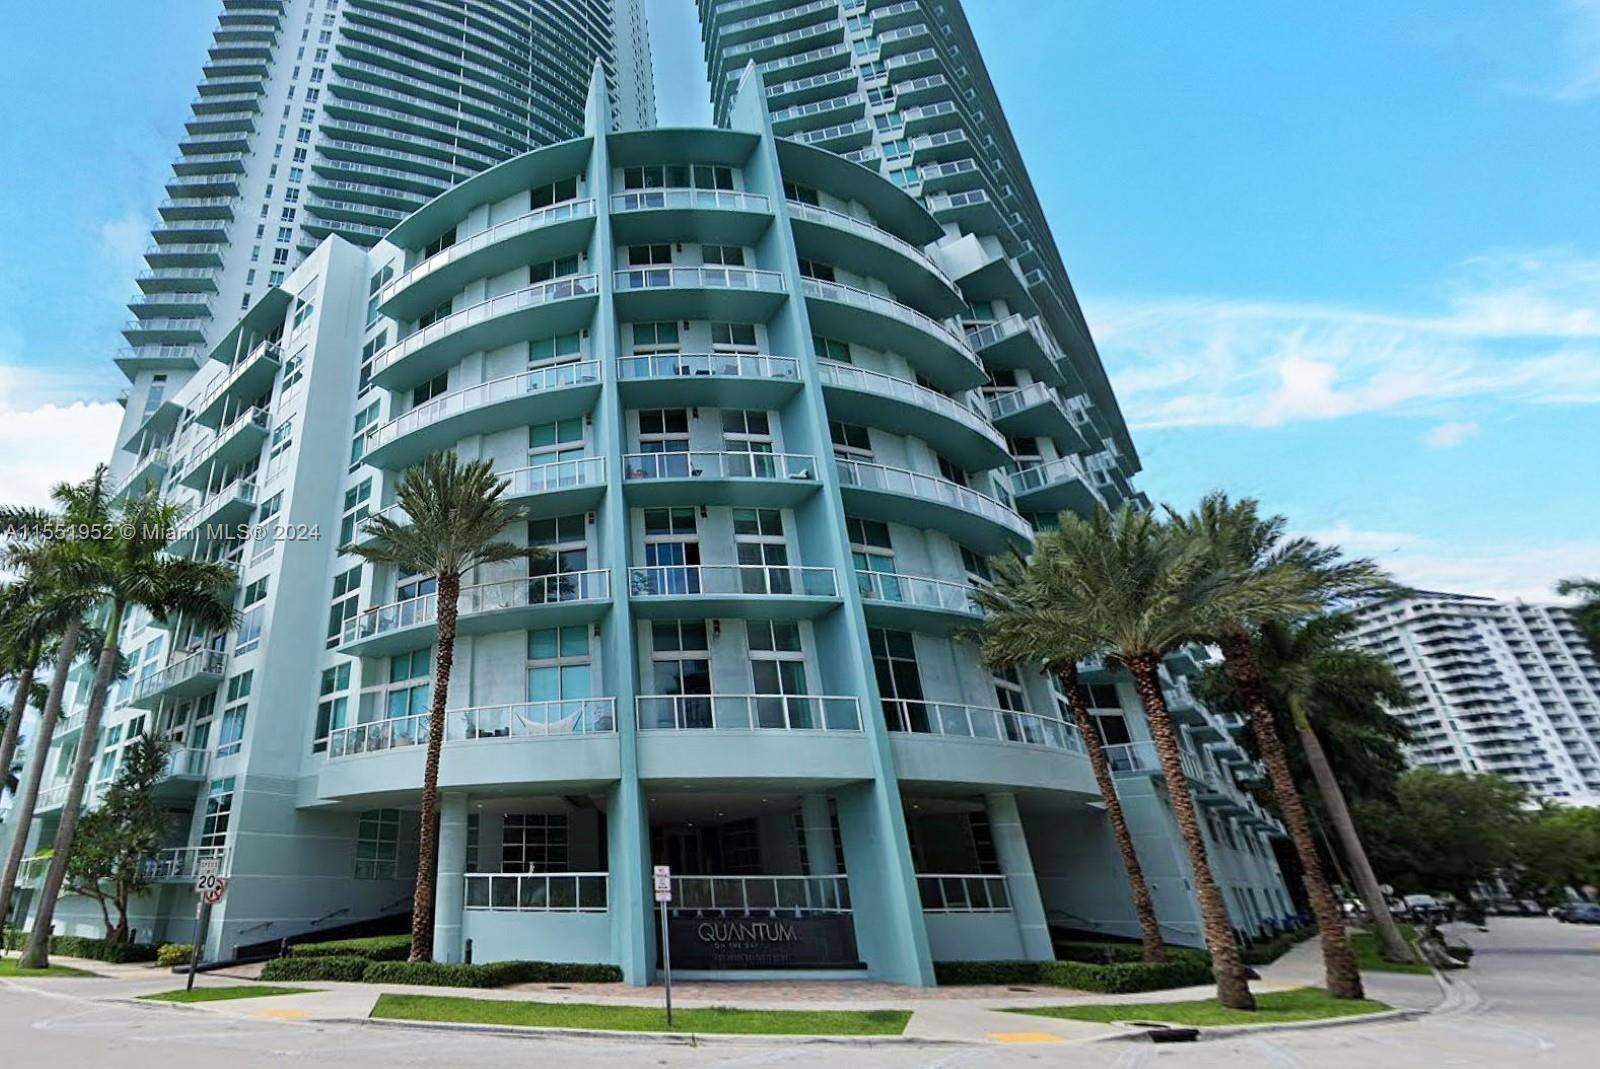 Indulge in stunning views of Biscayne Bay and the Miami Skyline from this high floor gem boasting a wrap around balcony.